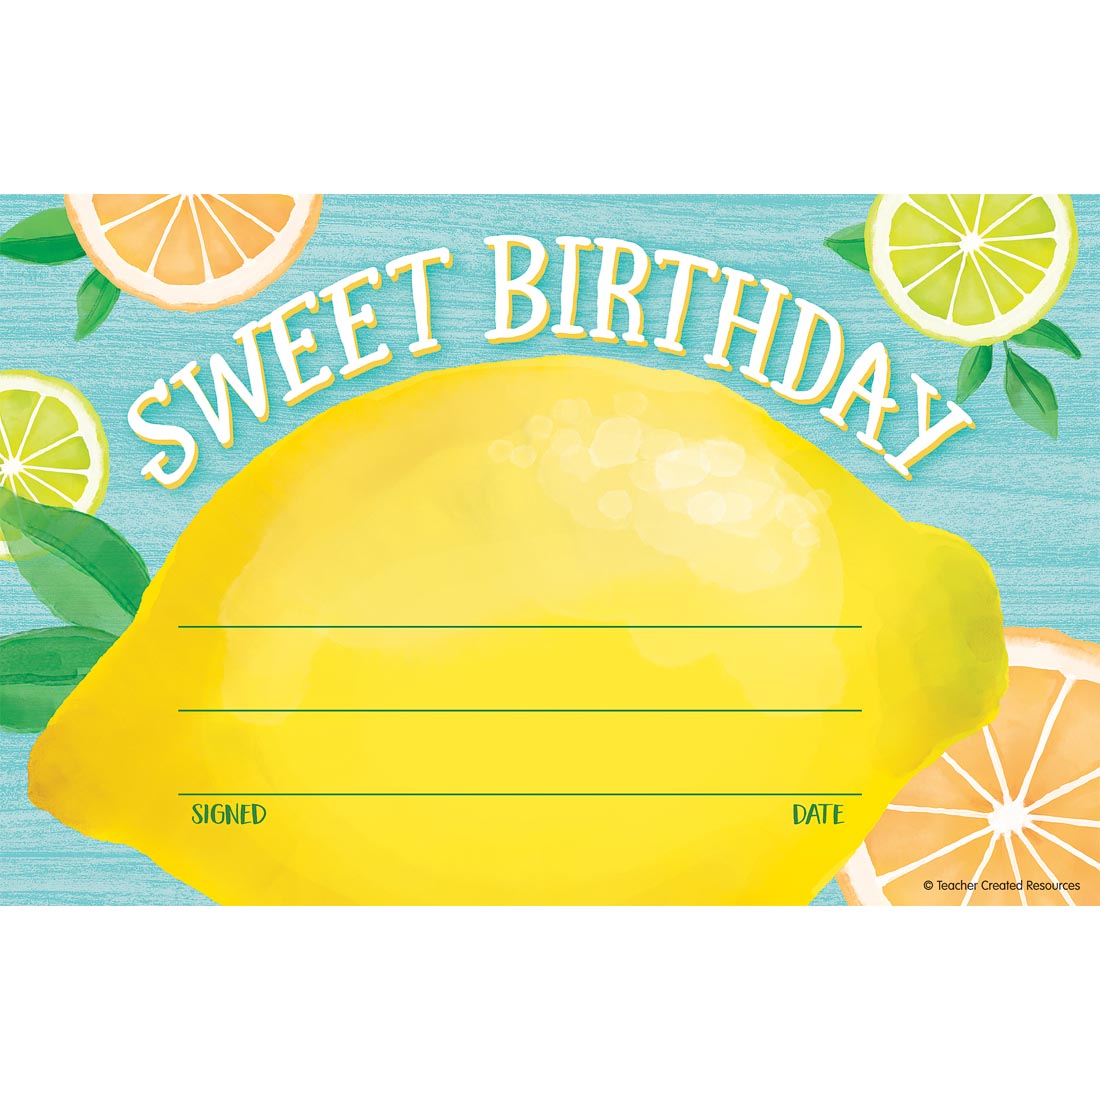 Sweet Birthday Award from the Lemon Zest collection by Teacher Created Resources